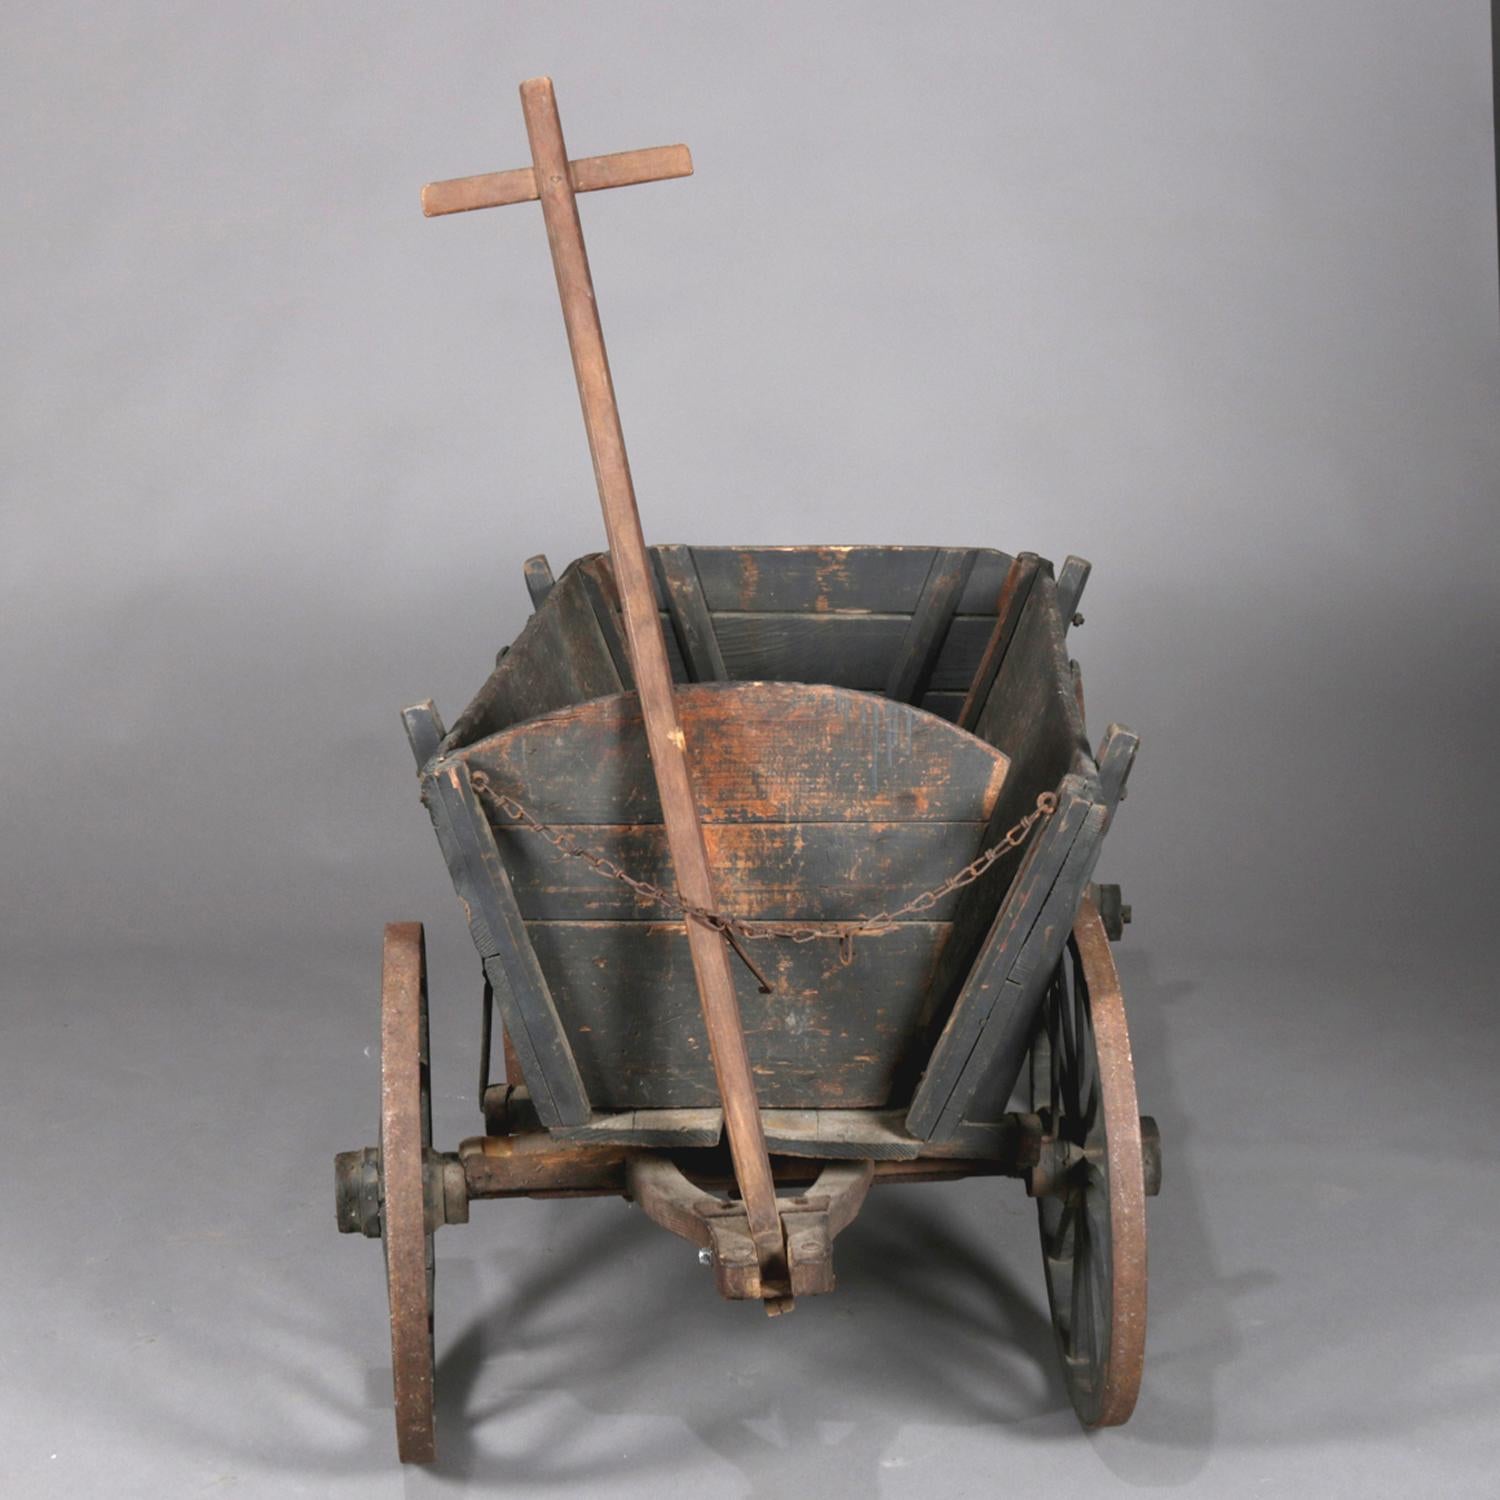 American Antique Primitive Western Milk Paint Wood and Iron Wagon, circa 1840